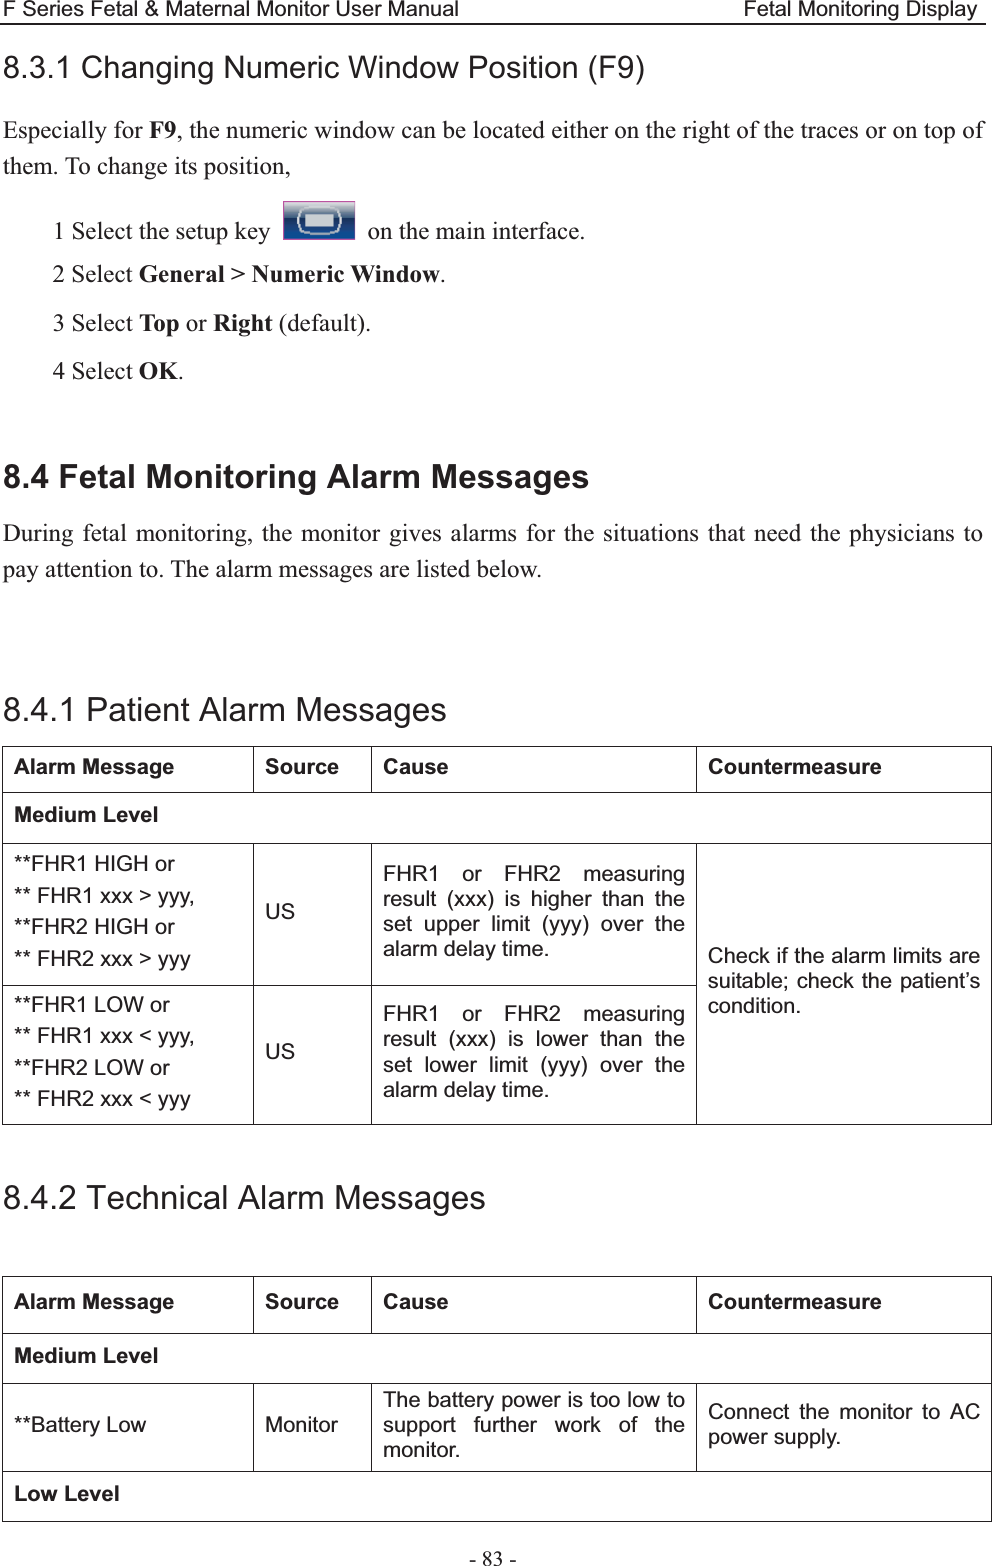 F Series Fetal &amp; Maternal Monitor User Manual                          Fetal Monitoring Display - 83 - 8.3.1 Changing Numeric Window Position (F9) Especially for F9, the numeric window can be located either on the right of the traces or on top of them. To change its position, 1 Select the setup key    on the main interface. 2 Select General &gt; Numeric Window. 3 Select Top or Right (default). 4 Select OK.  8.4 Fetal Monitoring Alarm Messages During fetal monitoring, the monitor gives alarms for the situations that need the physicians to pay attention to. The alarm messages are listed below.   8.4.1 Patient Alarm Messages Alarm Message  Source  Cause  Countermeasure Medium Level **FHR1 HIGH or ** FHR1 xxx &gt; yyy, **FHR2 HIGH or ** FHR2 xxx &gt; yyy US FHR1 or FHR2 measuring result (xxx) is higher than the set upper limit (yyy) over the alarm delay time.  Check if the alarm limits are suitable; check the patient’s condition. **FHR1 LOW or   ** FHR1 xxx &lt; yyy, **FHR2 LOW or ** FHR2 xxx &lt; yyy US FHR1 or FHR2 measuring result (xxx) is lower than the set lower limit (yyy) over the alarm delay time.  8.4.2 Technical Alarm Messages  Alarm Message  Source  Cause  Countermeasure Medium Level **Battery Low  Monitor The battery power is too low to support further work of the monitor. Connect the monitor to AC power supply. Low Level 